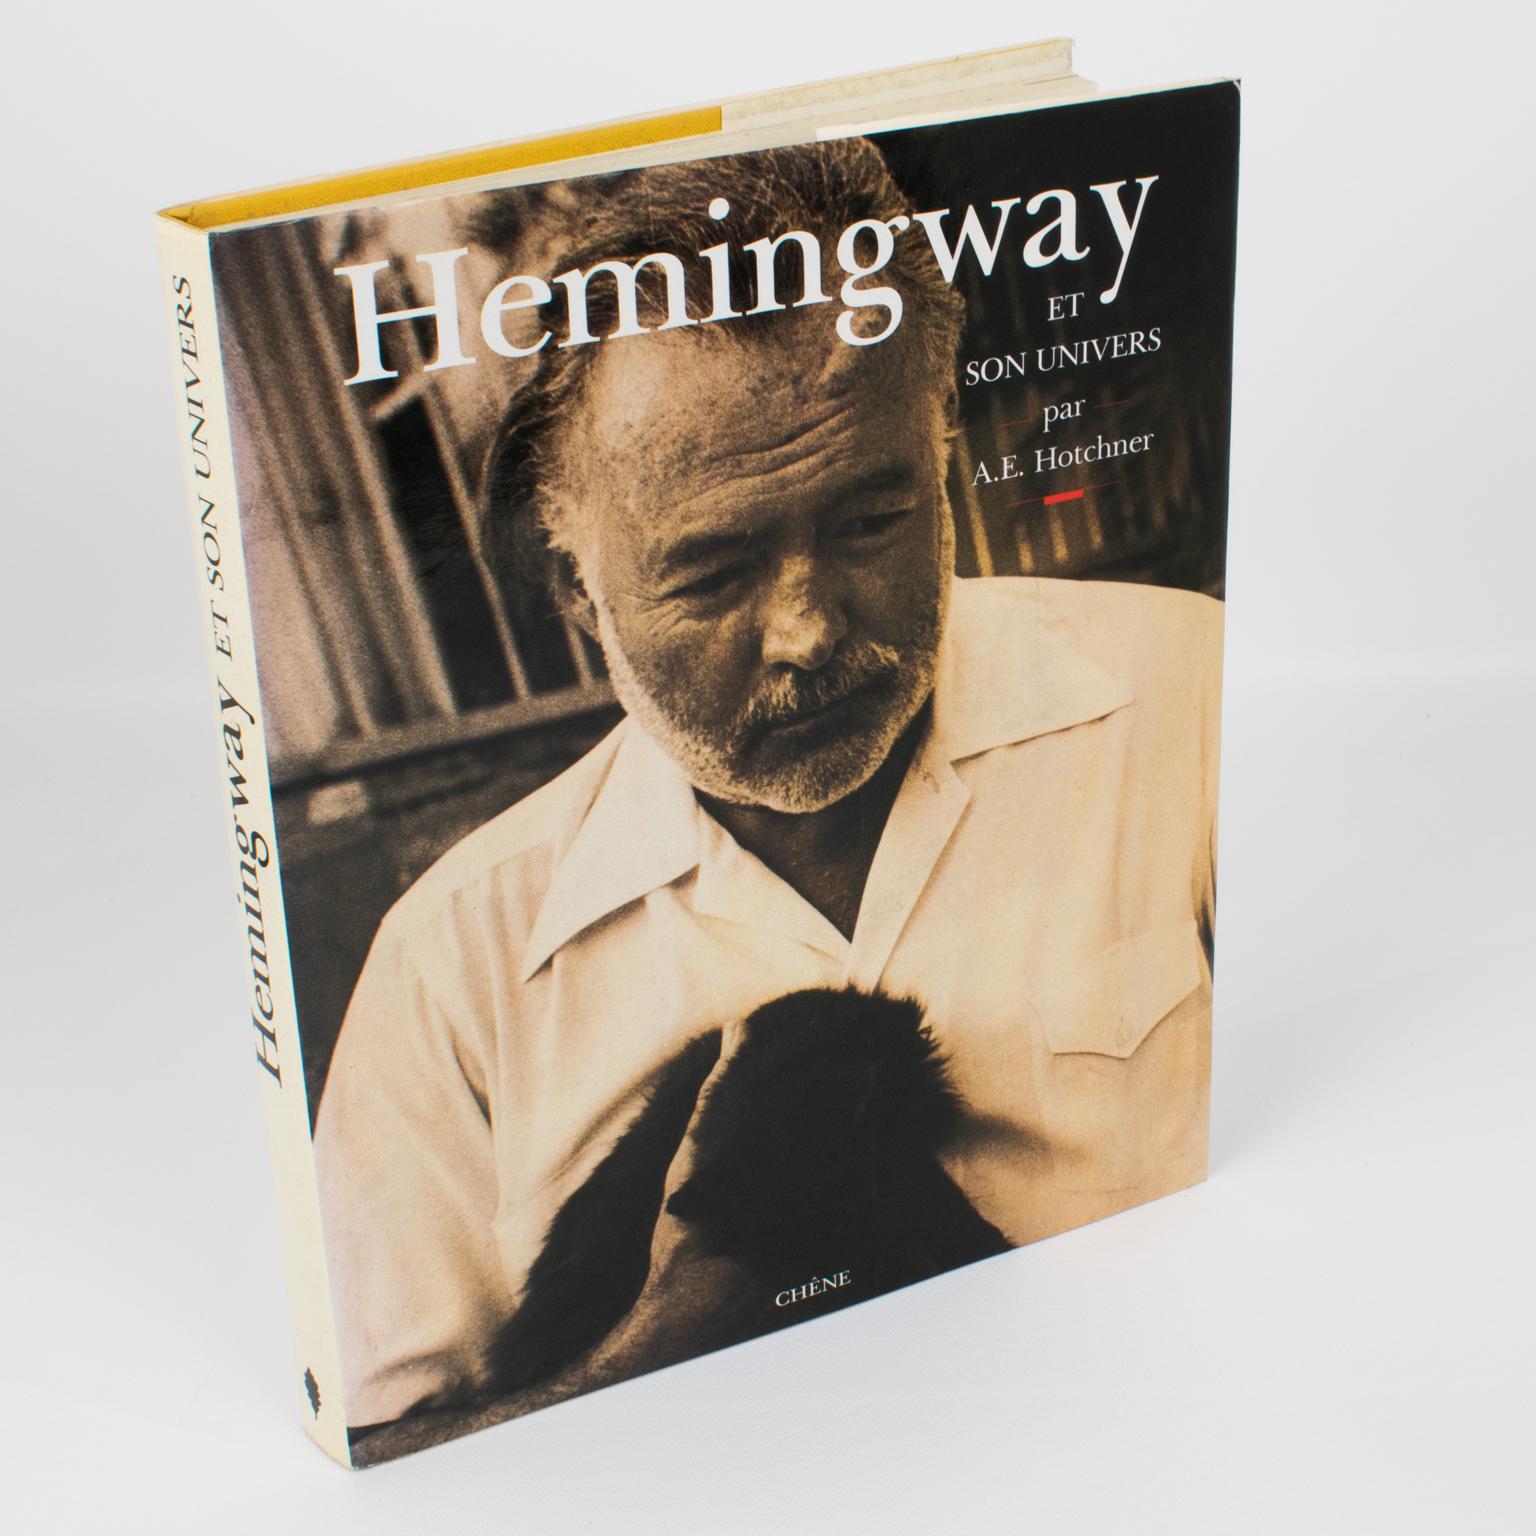 Hemingway et son Univers (Hemingway and His Universe), French book by A. E. Hotchner, original edition, 1990.
A great writer, a force of nature, and a man who faced death.
Illustrated biography, composed of personal memories of the author, a close